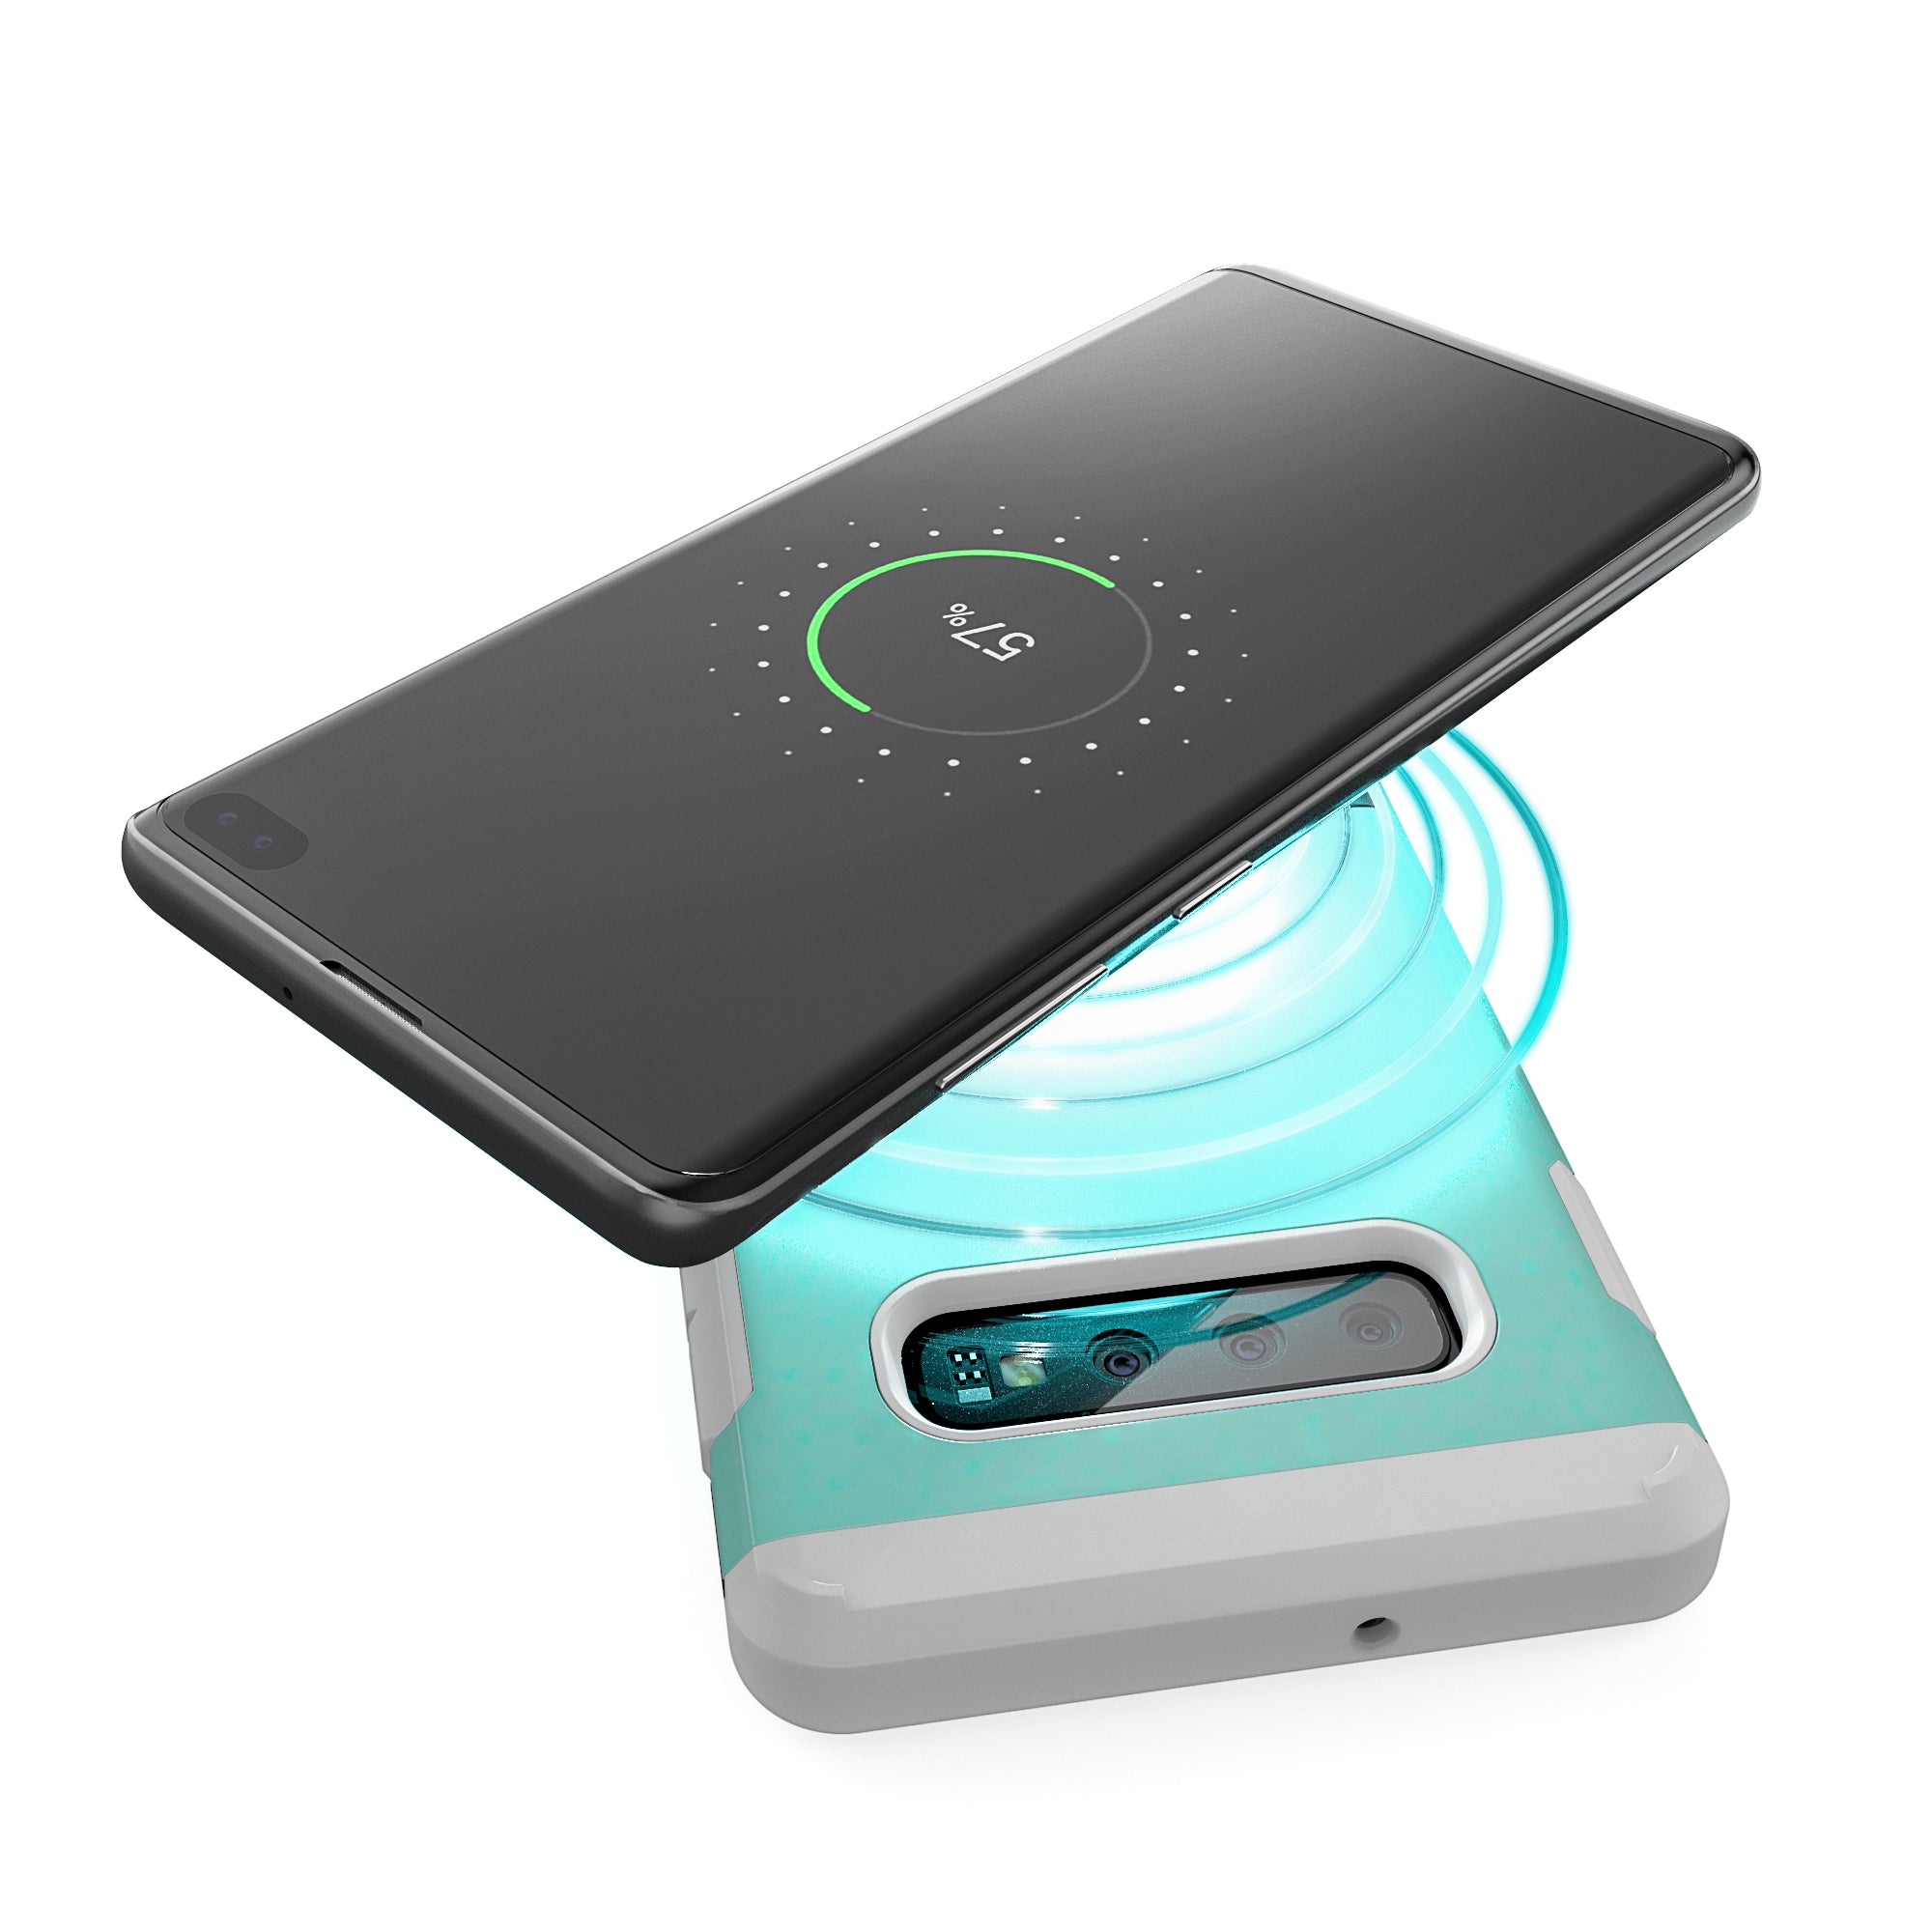 Galaxy S10 Plus Case Strong Guard